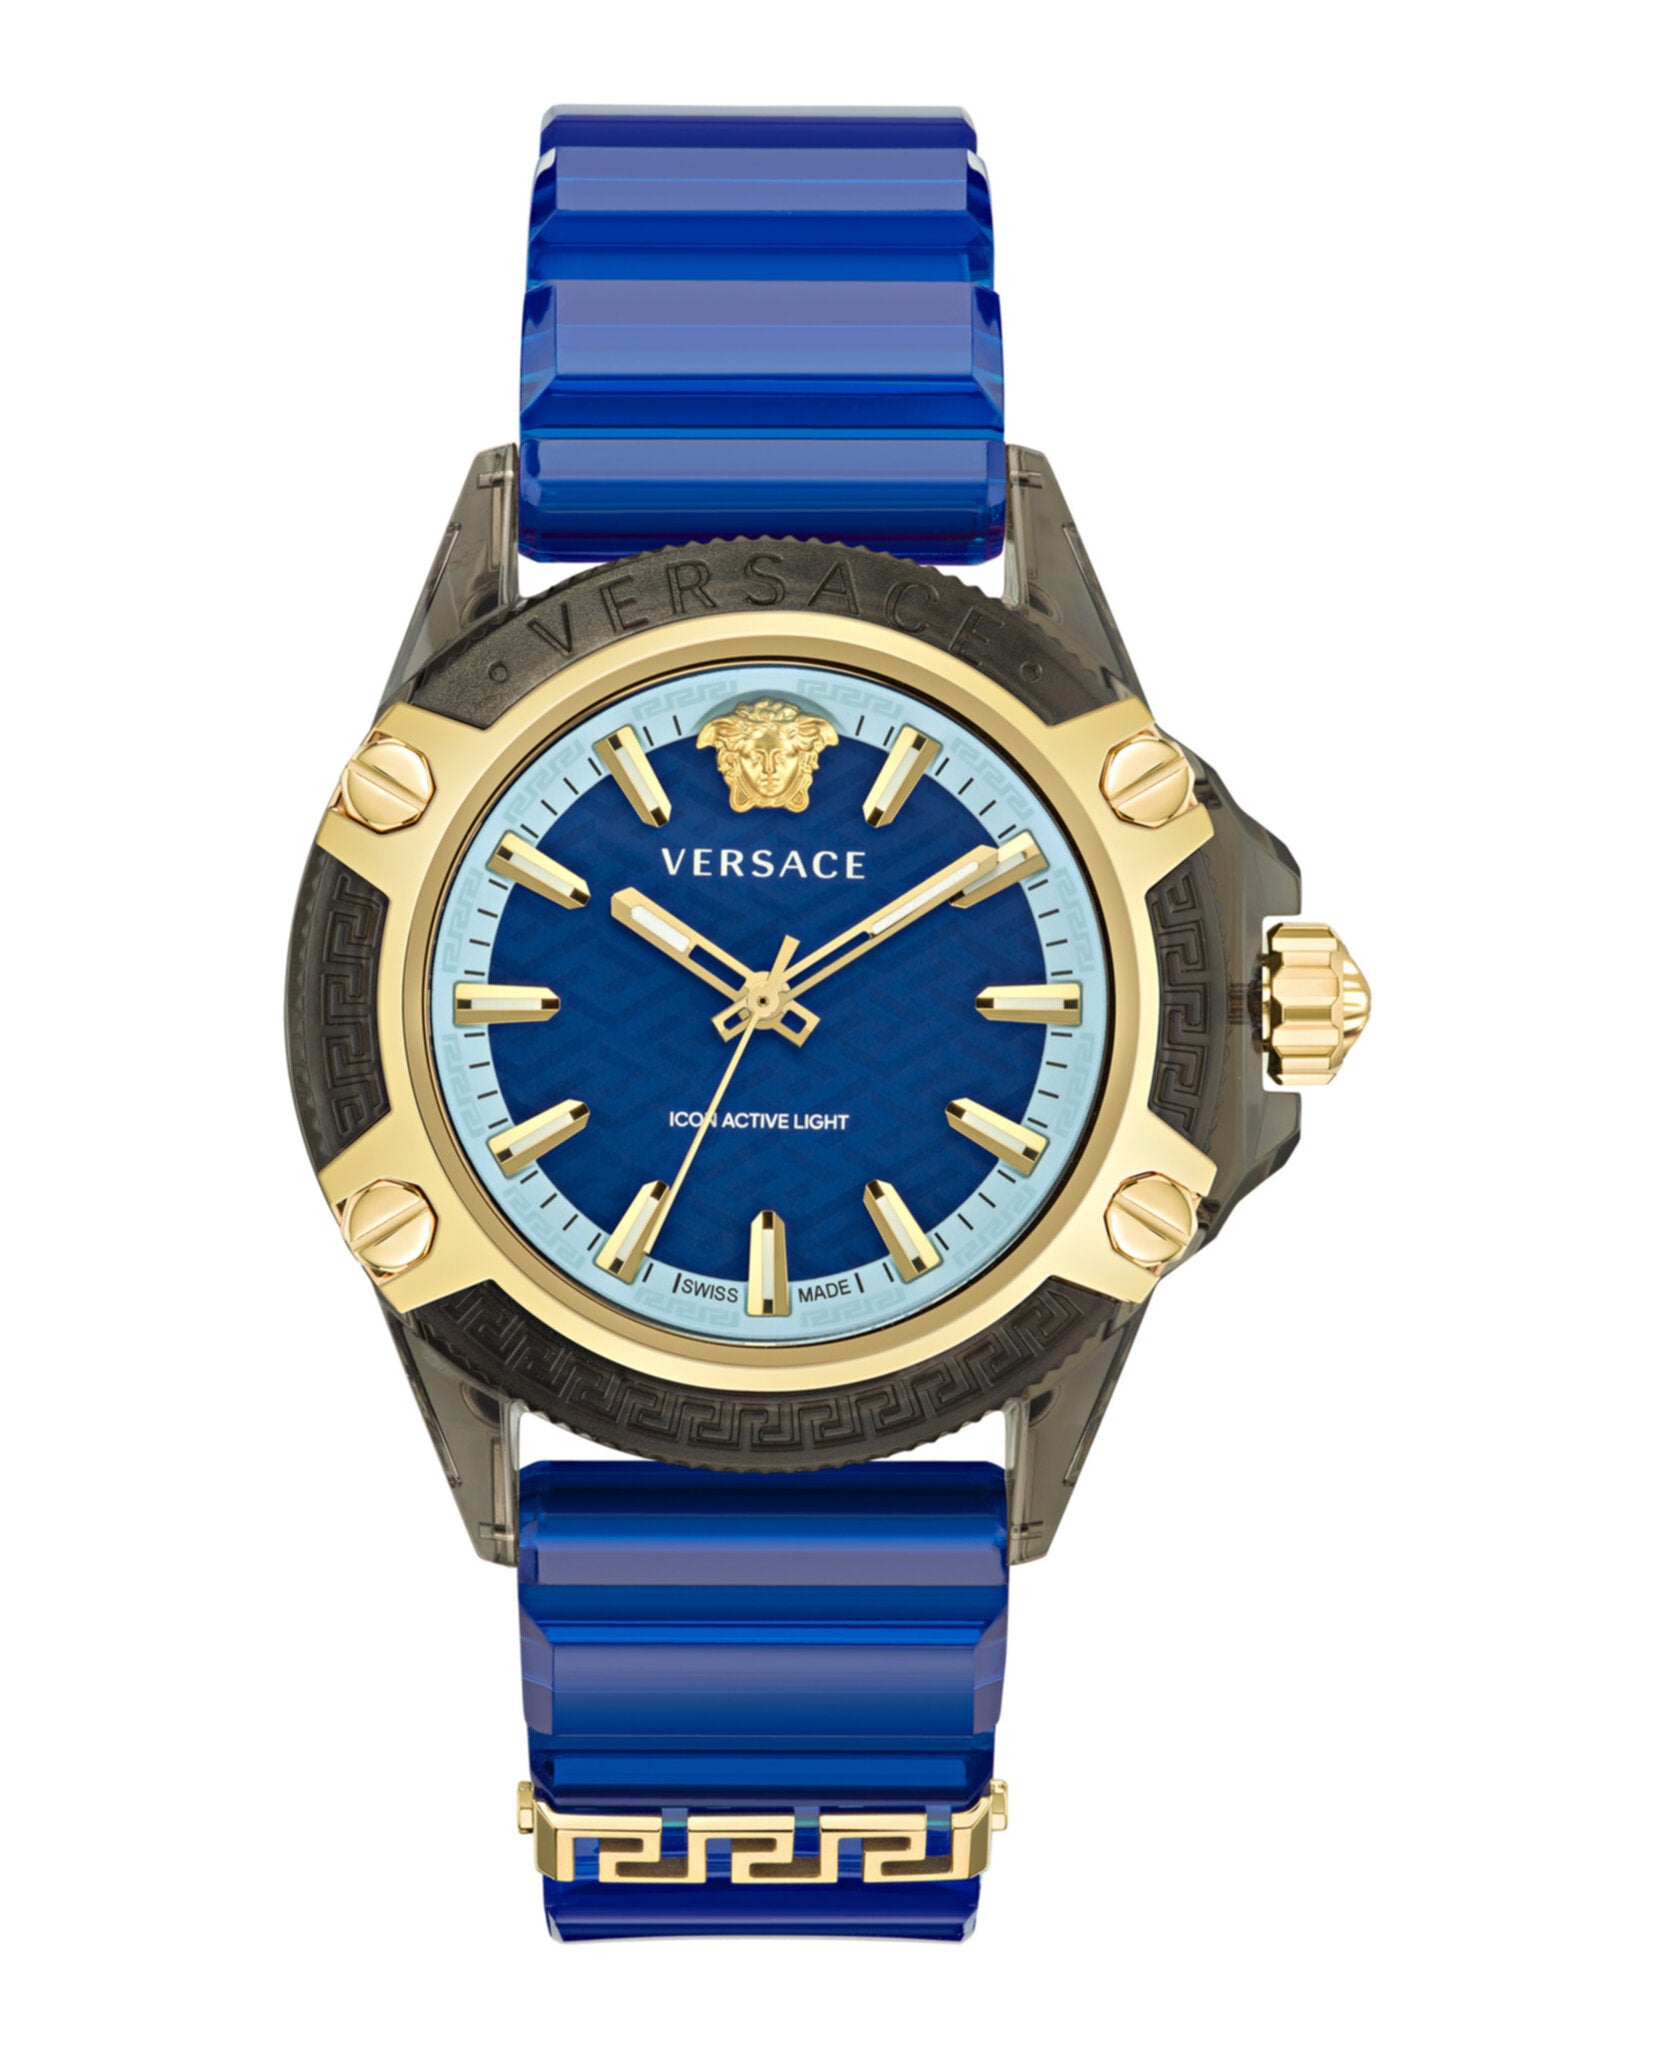 Versace Mens Icon Active | MadaLuxe Watches Madaluxe – Time Time